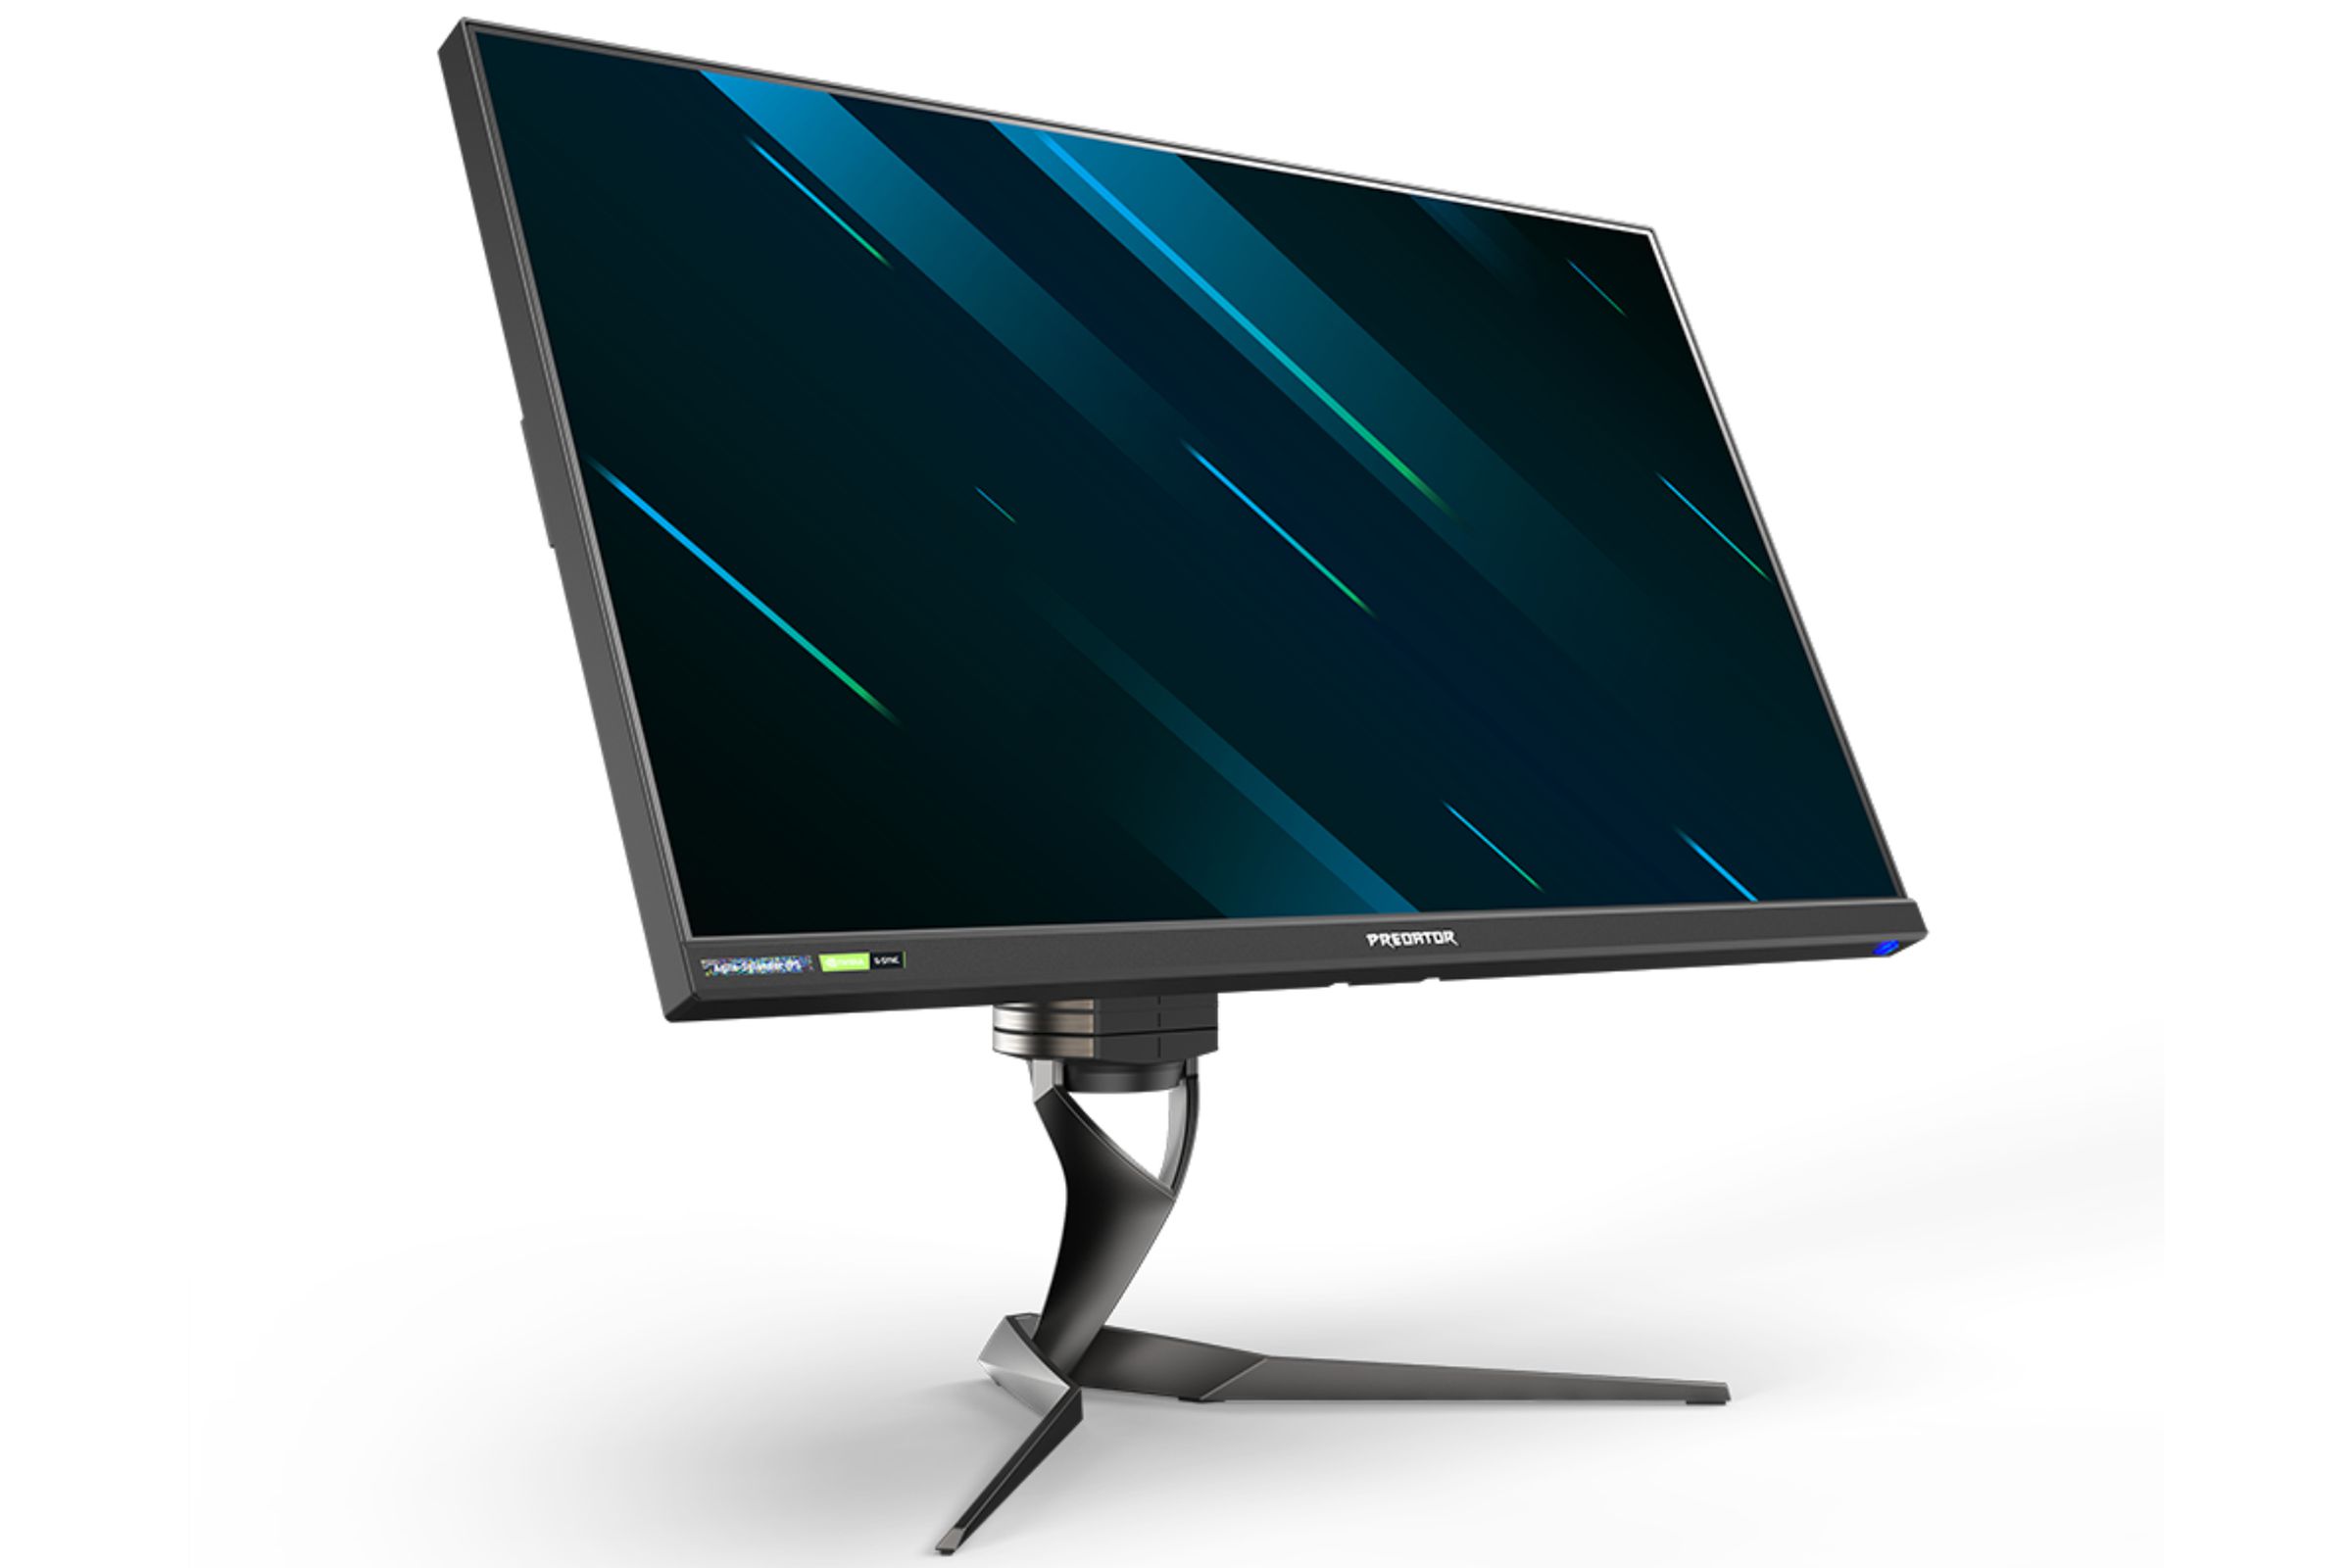 The XB323U GX is a 32-inch QHD monitor that supports HDR content and is G-Sync compatible.